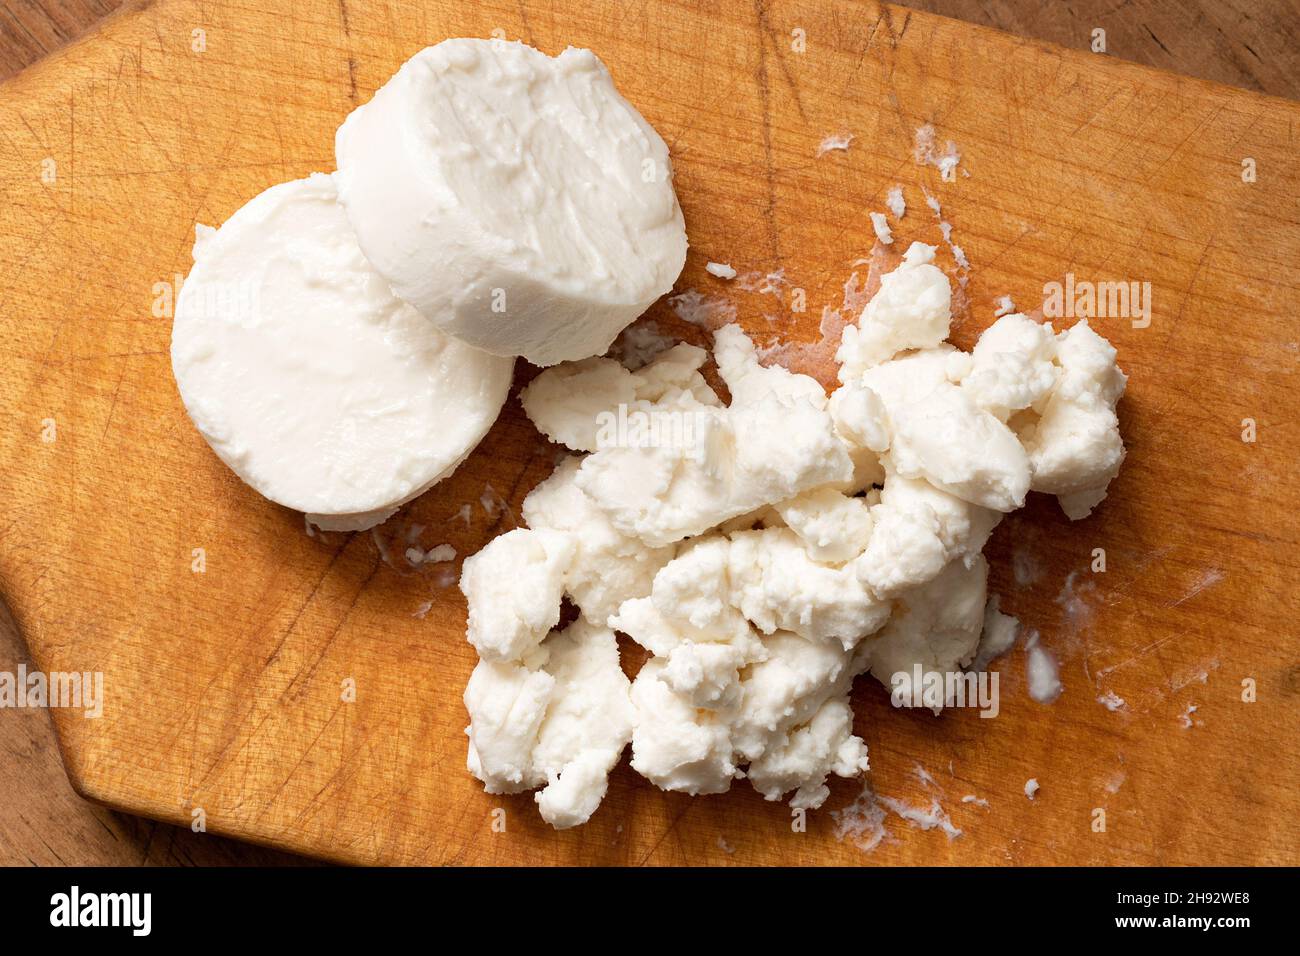 Two rounds of goat cheese and crumbled goat cheese on wood chopping board. Top view. Stock Photo